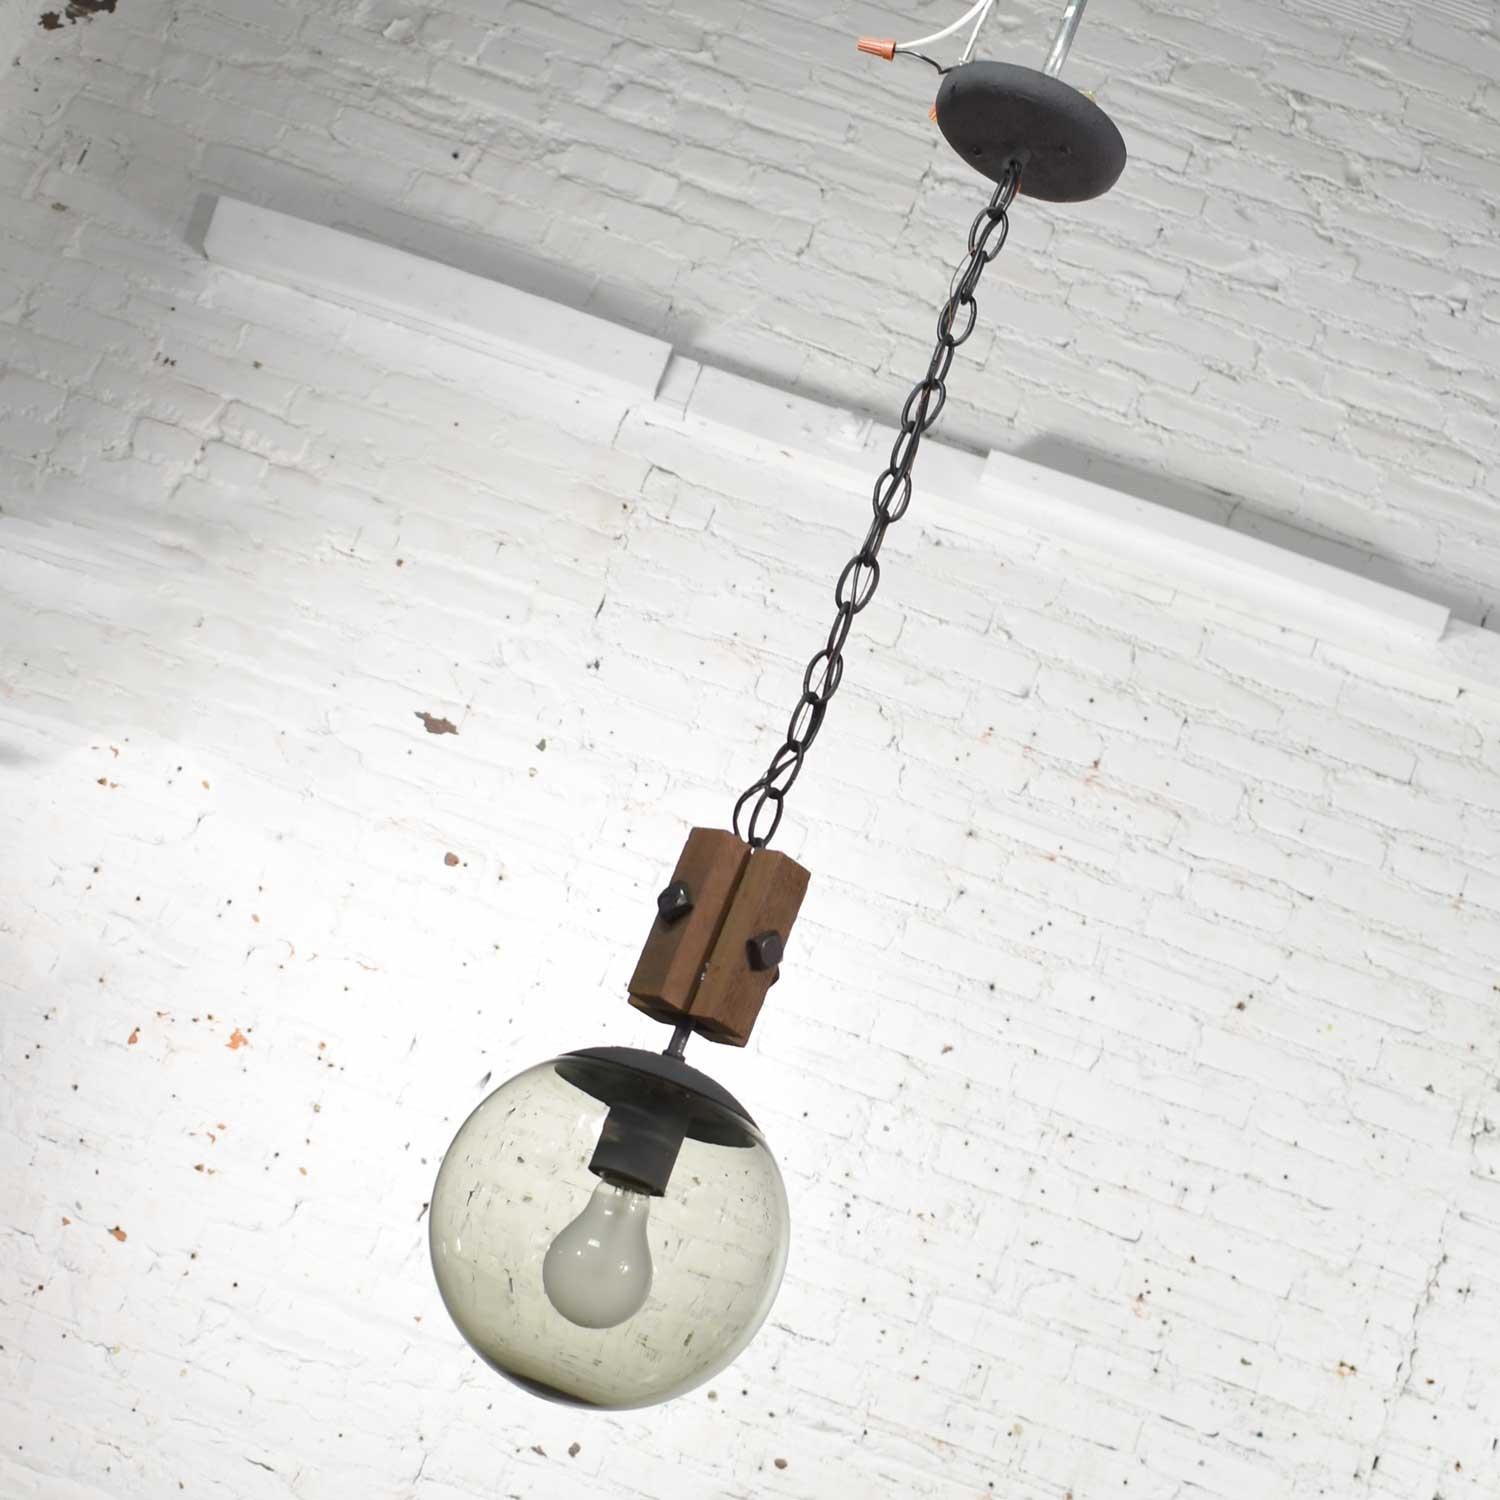 20th Century Mid-Century Modern NOS Wood and Smoked Glass Globe Pendant Light Black Chain For Sale